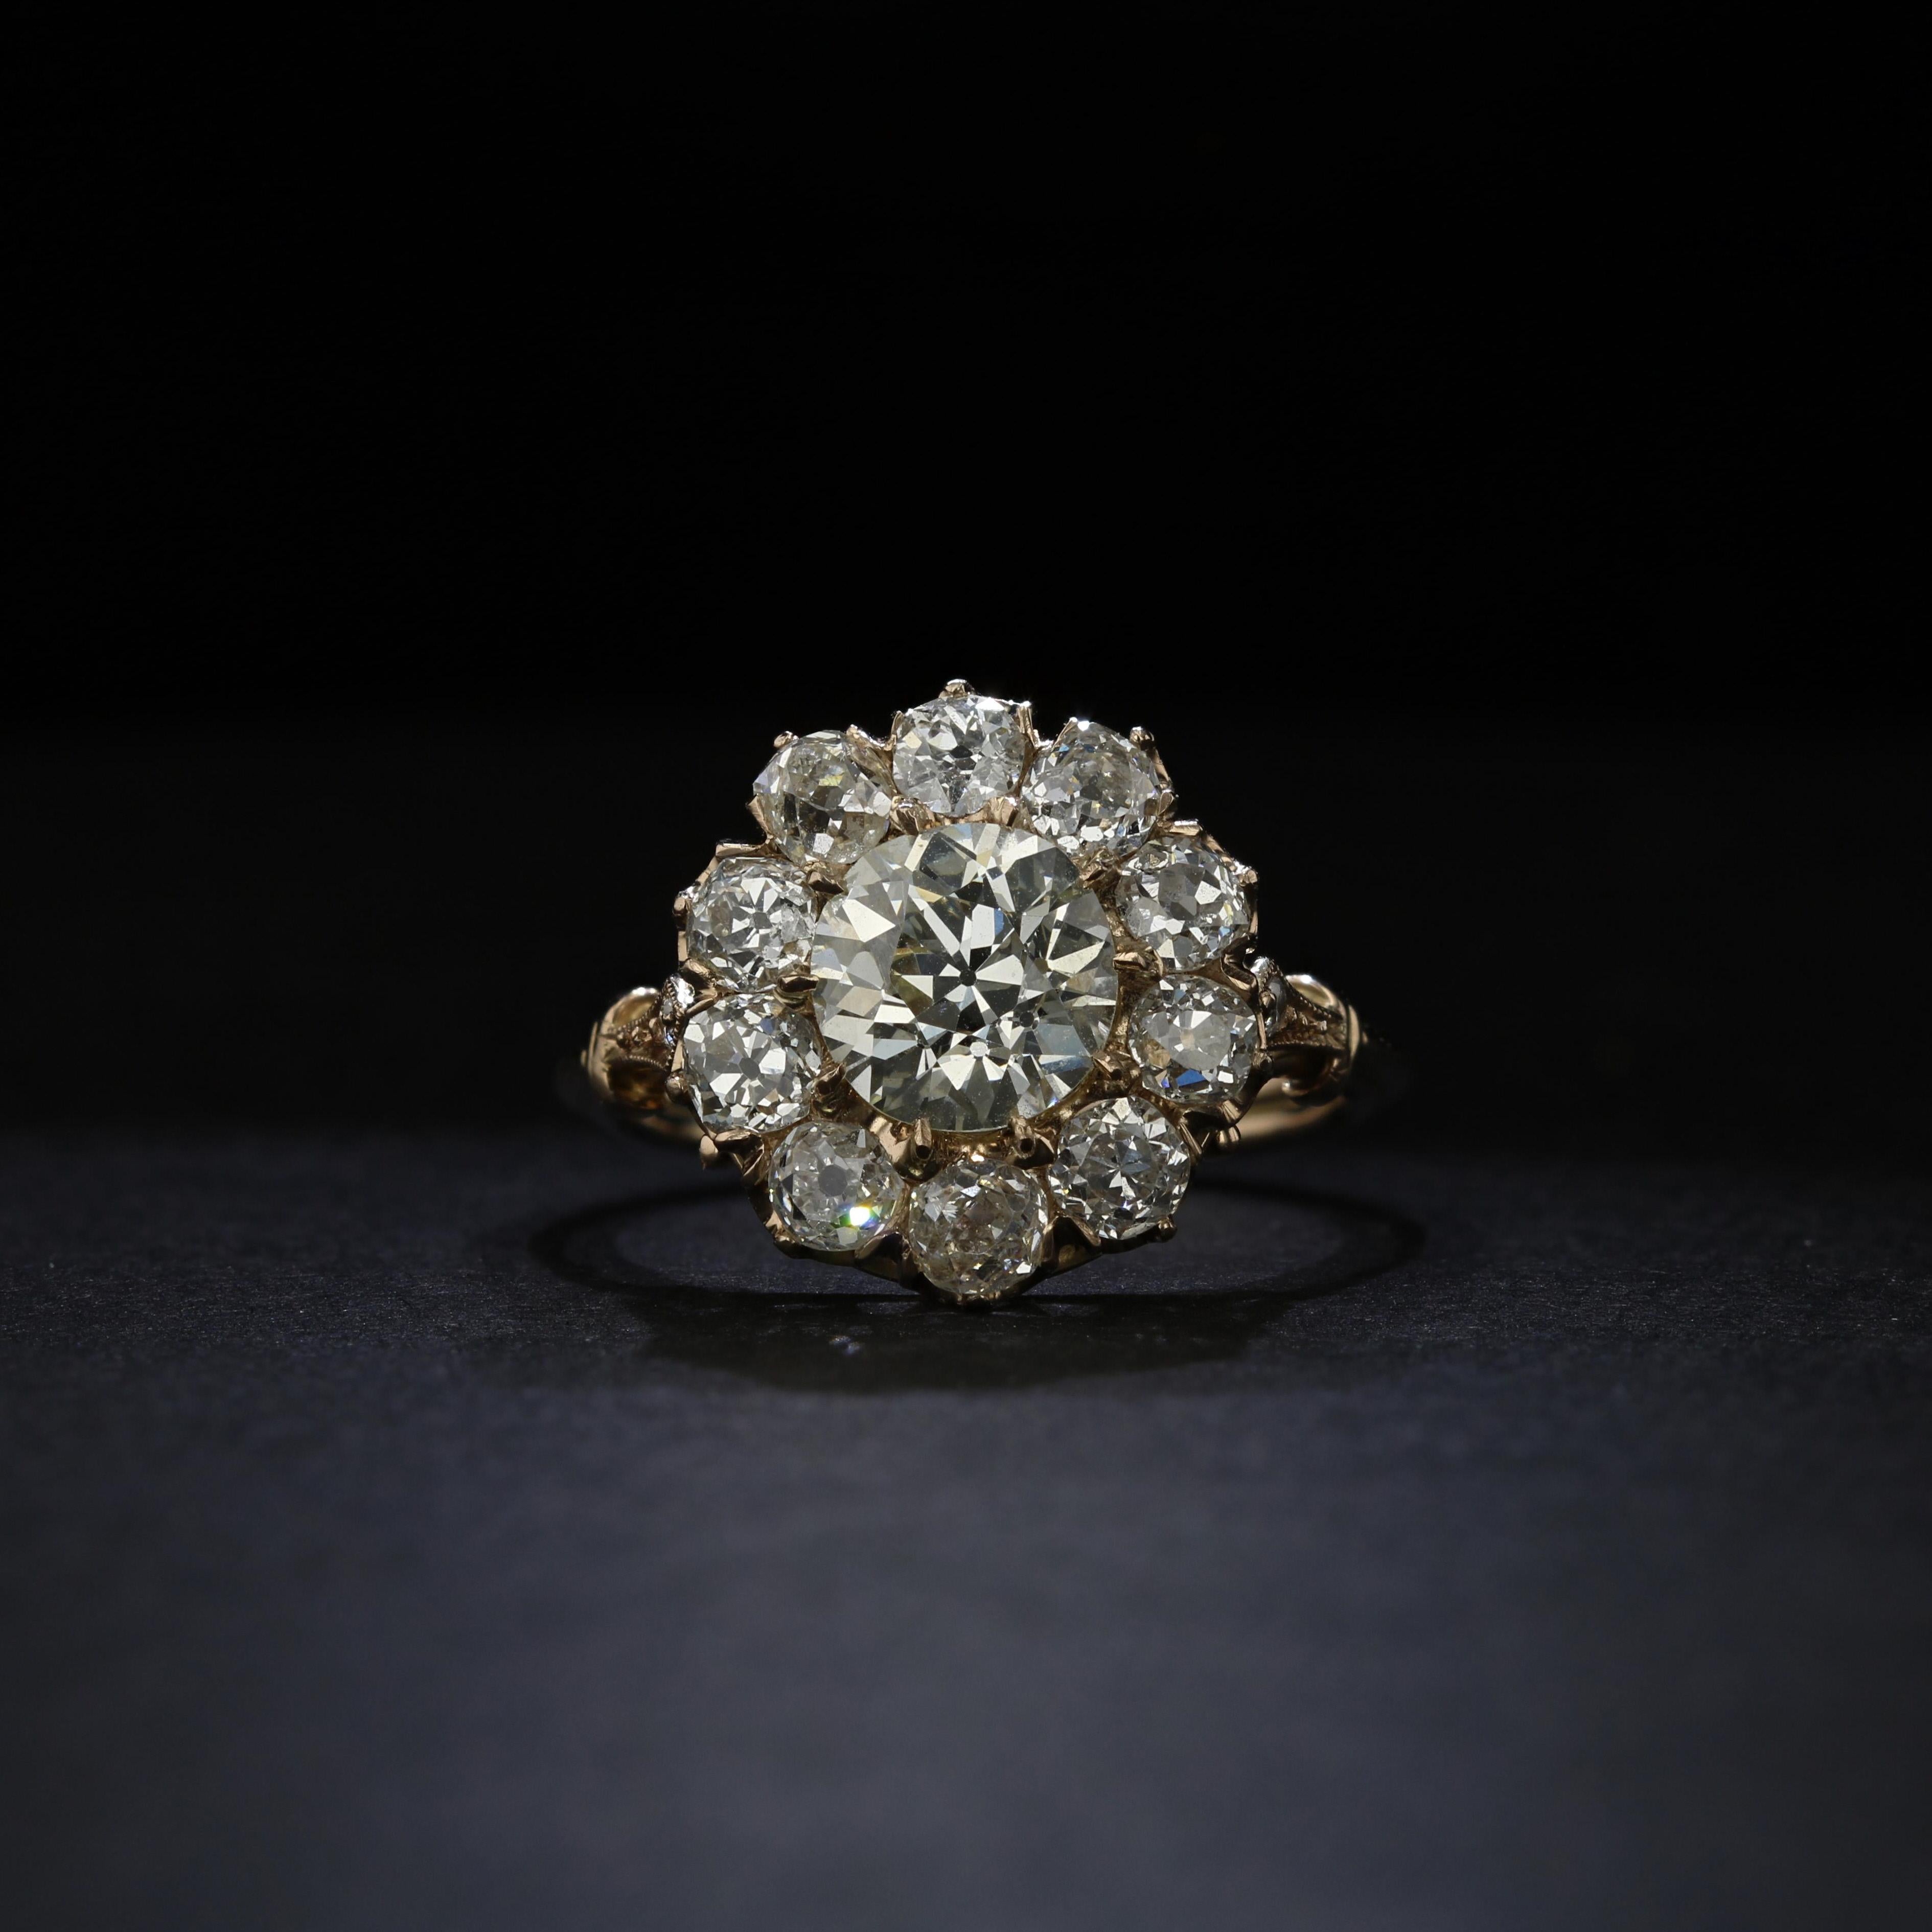 Ten old mine diamonds surround a stunning 1.70 carat Old European diamond in this estate cluster ring handmade in 14k yellow gold. An extra diamond, along with elegant scrollwork and millegrain detailing is set in each shoulder of the ring. A